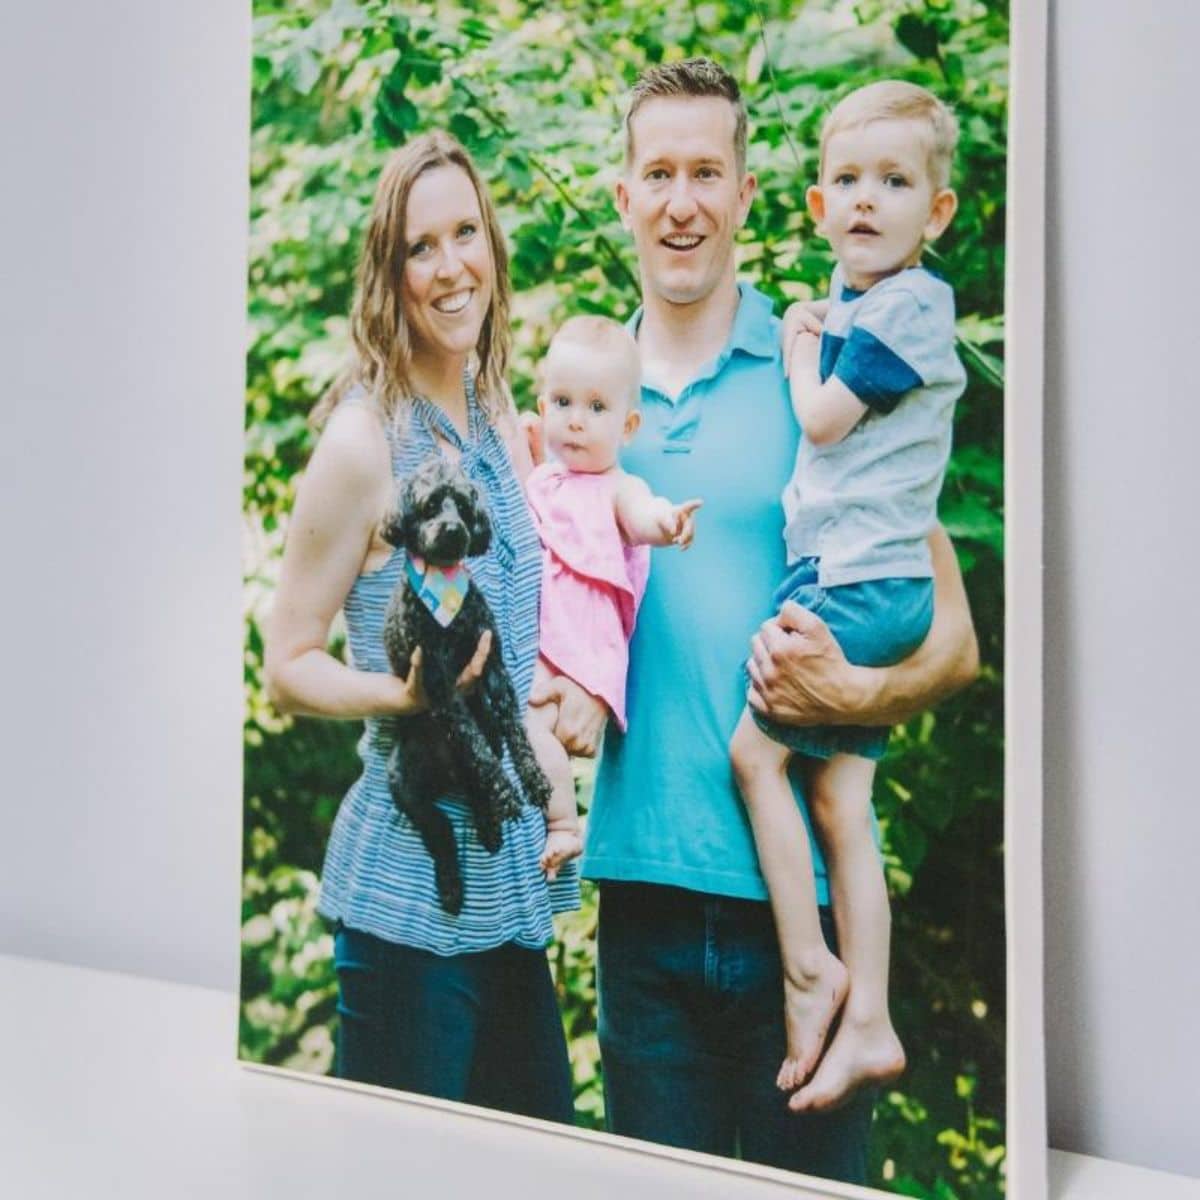 Handmade photo canvas with a photograph of a young family, made with Mod Podge.